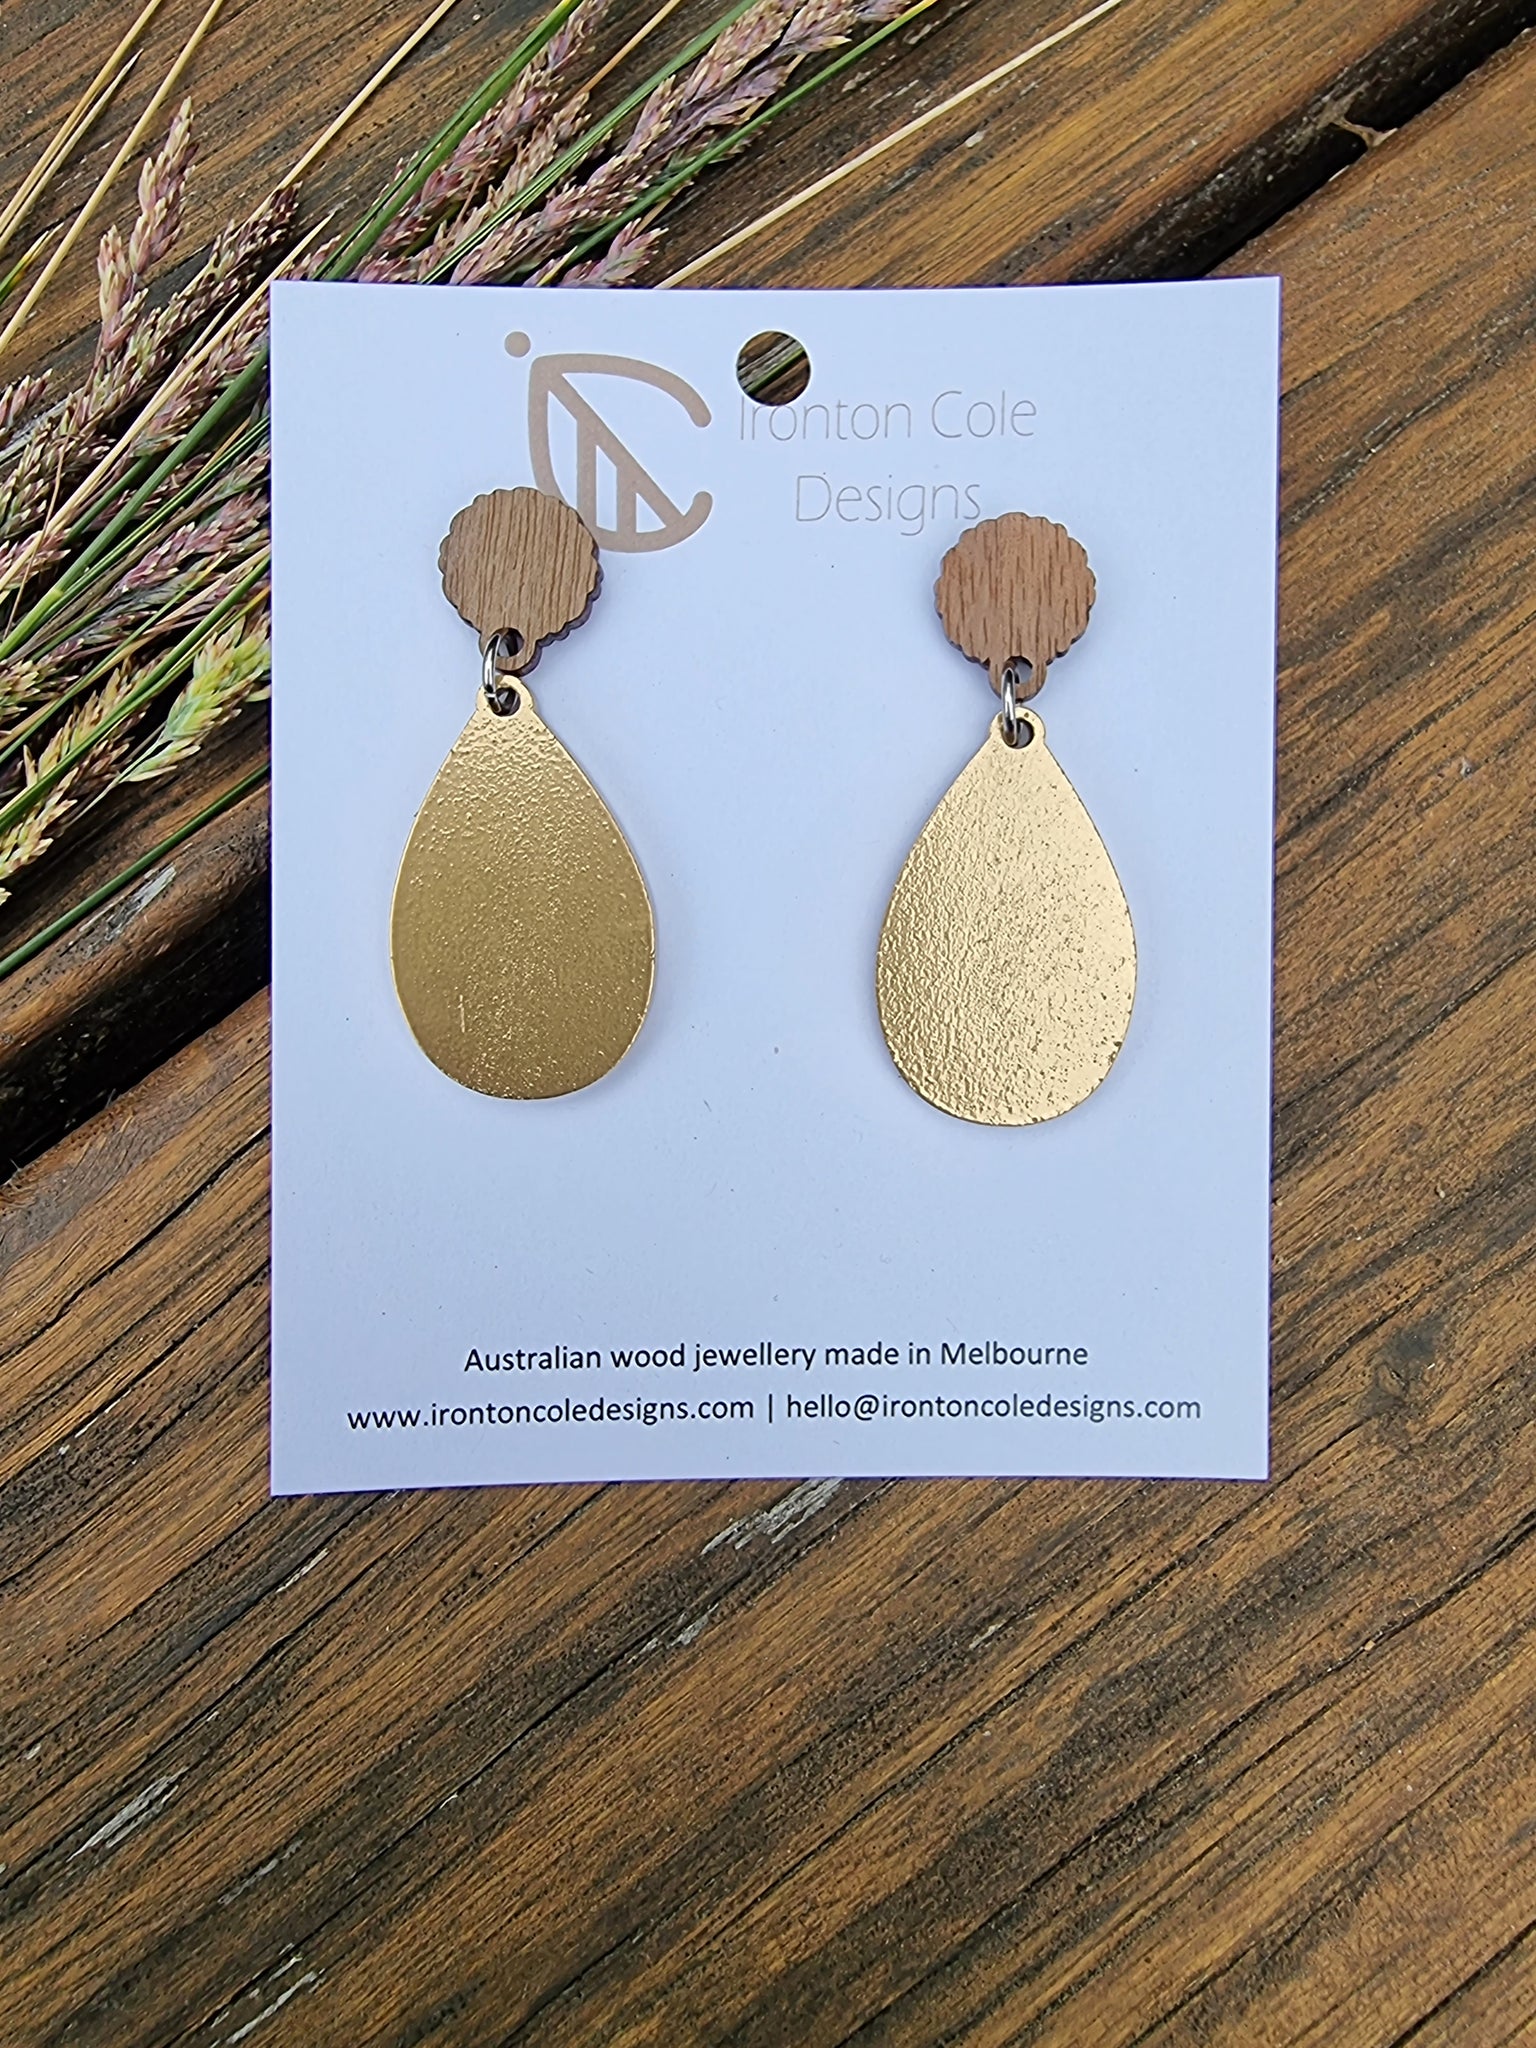 Gold painted tear drop shaped wooden earrings. Hypoallergenic posts. 